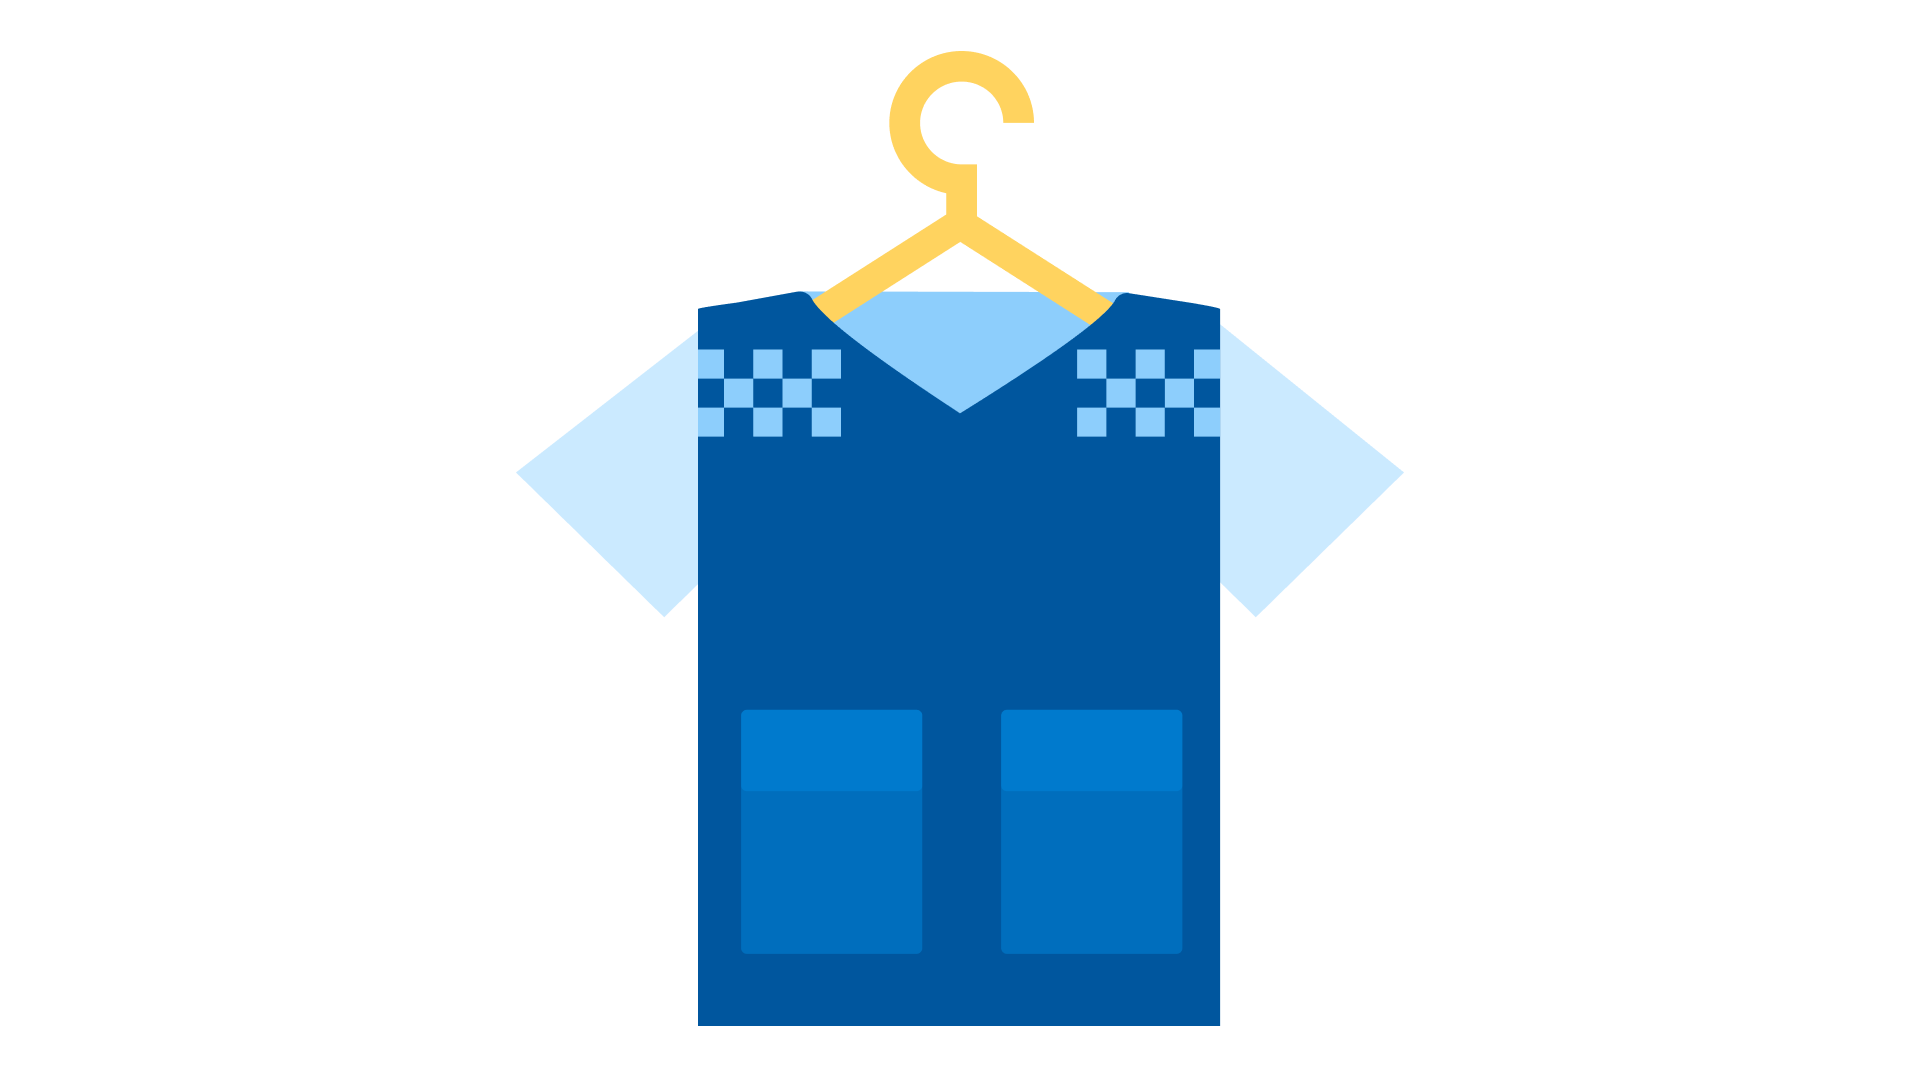 Illustration of a police uniform on a yellow coat hanger.